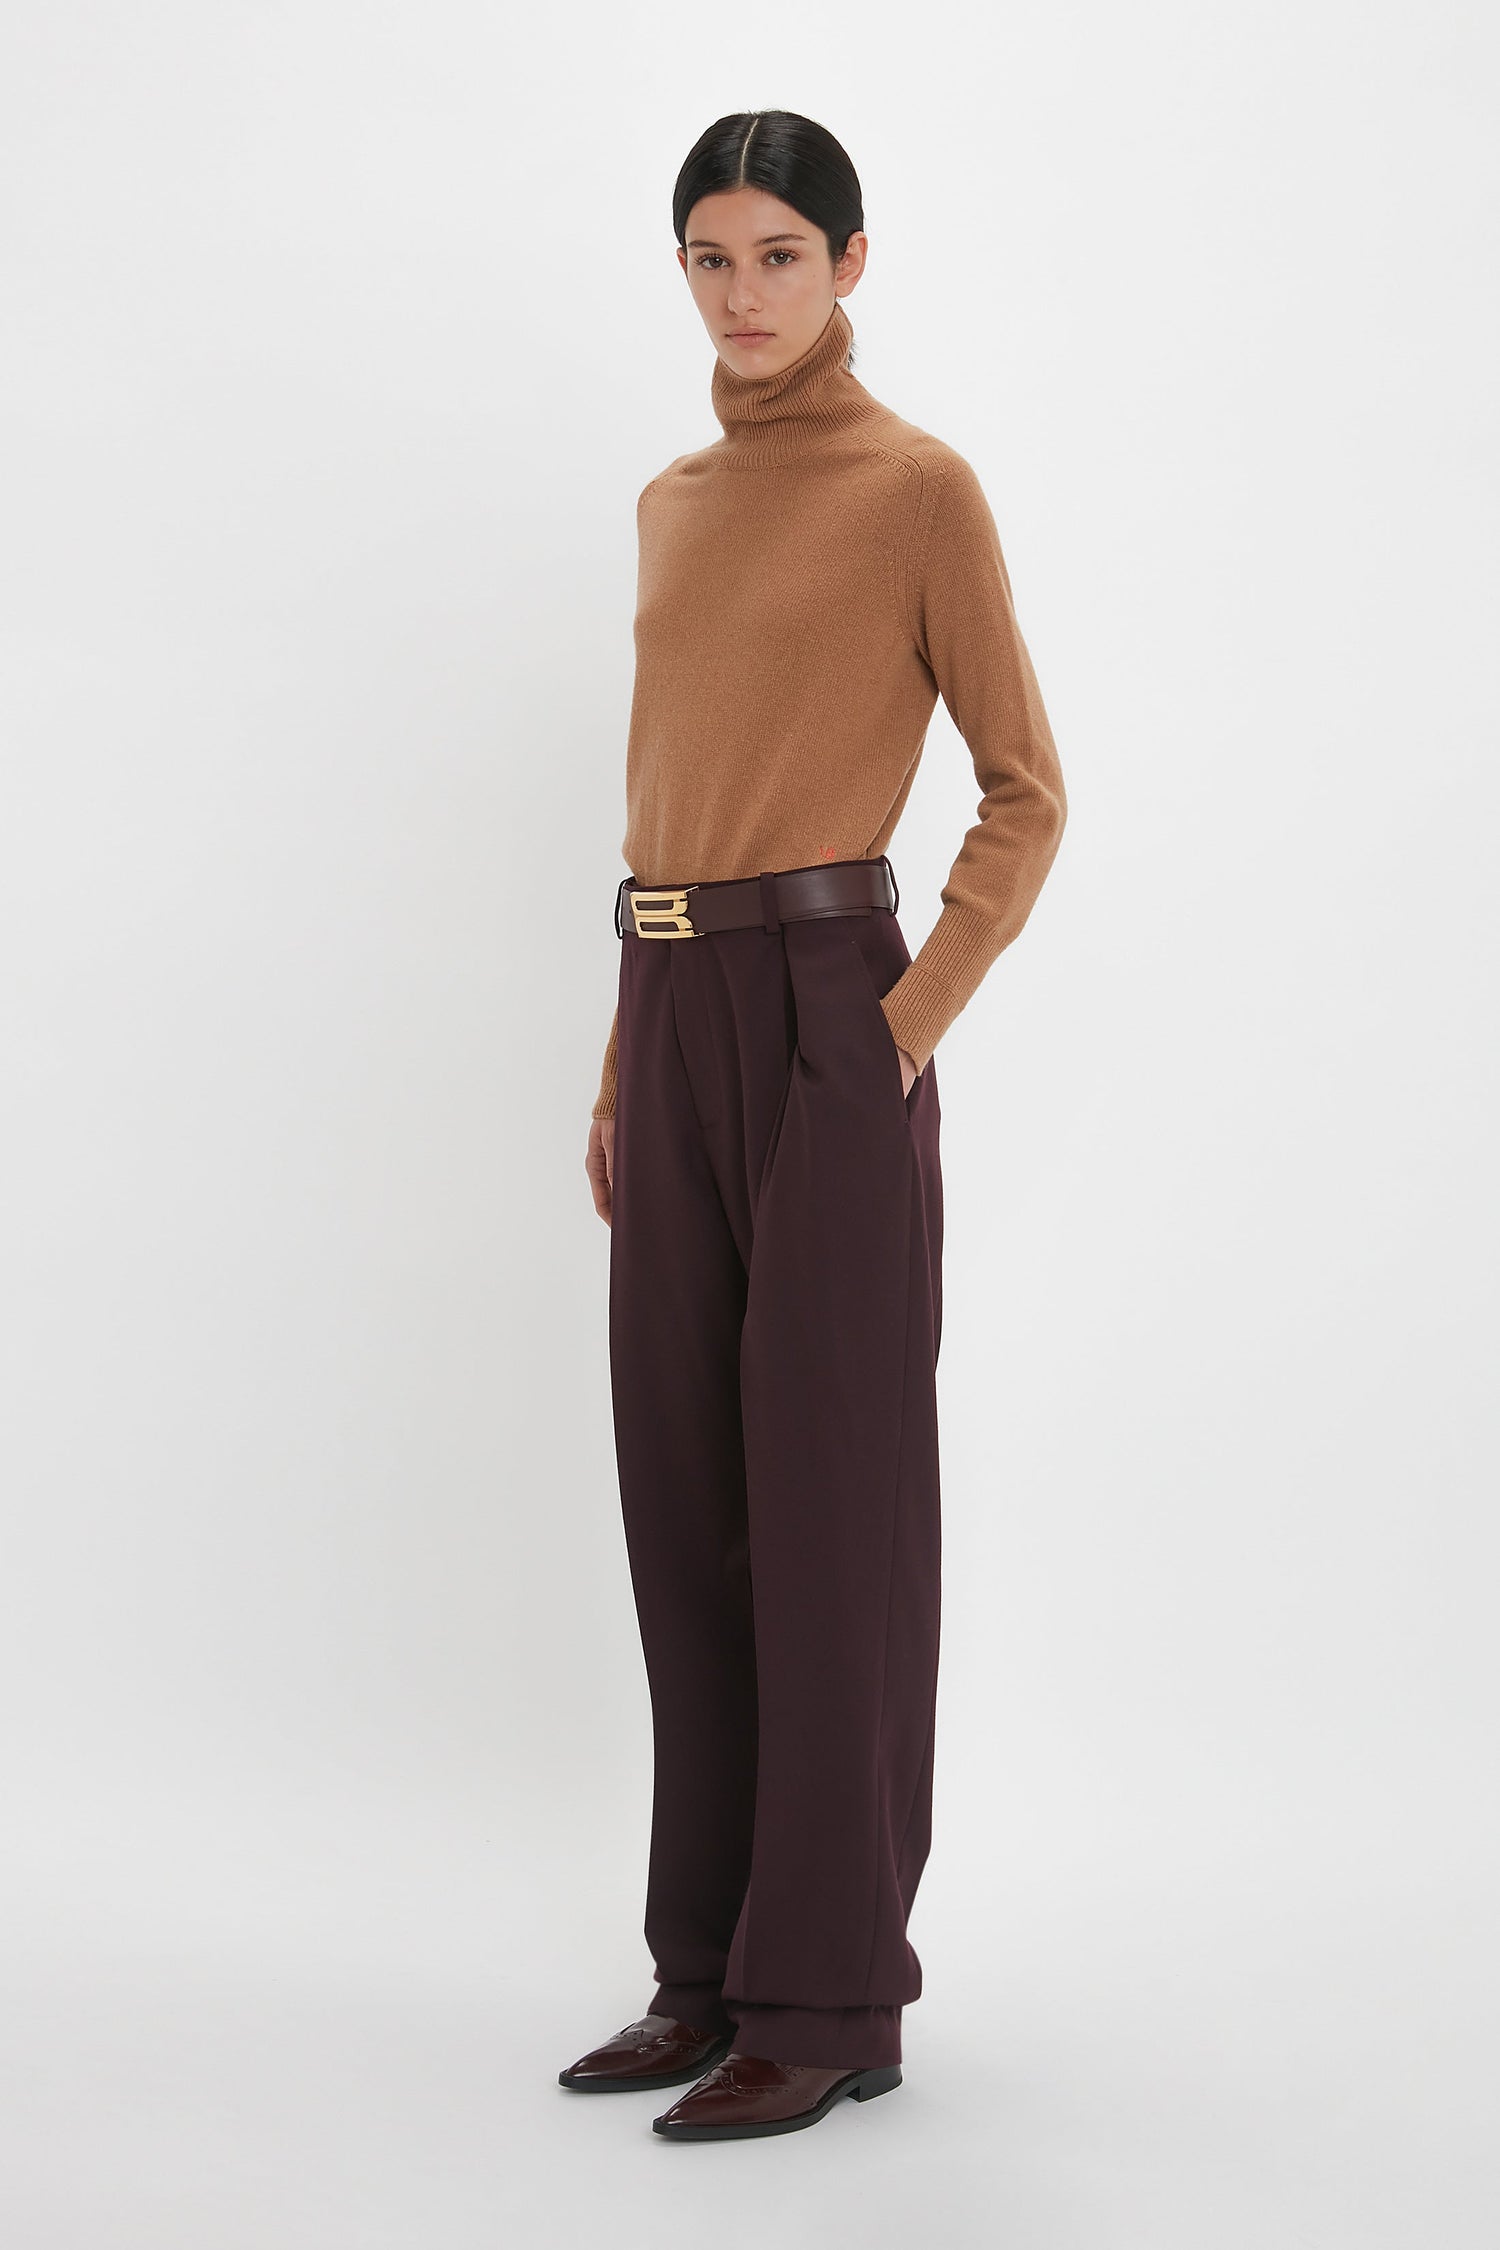 Person standing against a plain white background, wearing a camel-colored turtleneck sweater, Victoria Beckham Asymmetric Chino Trouser In Deep Mahogany with a belt, and dark brown shoes.